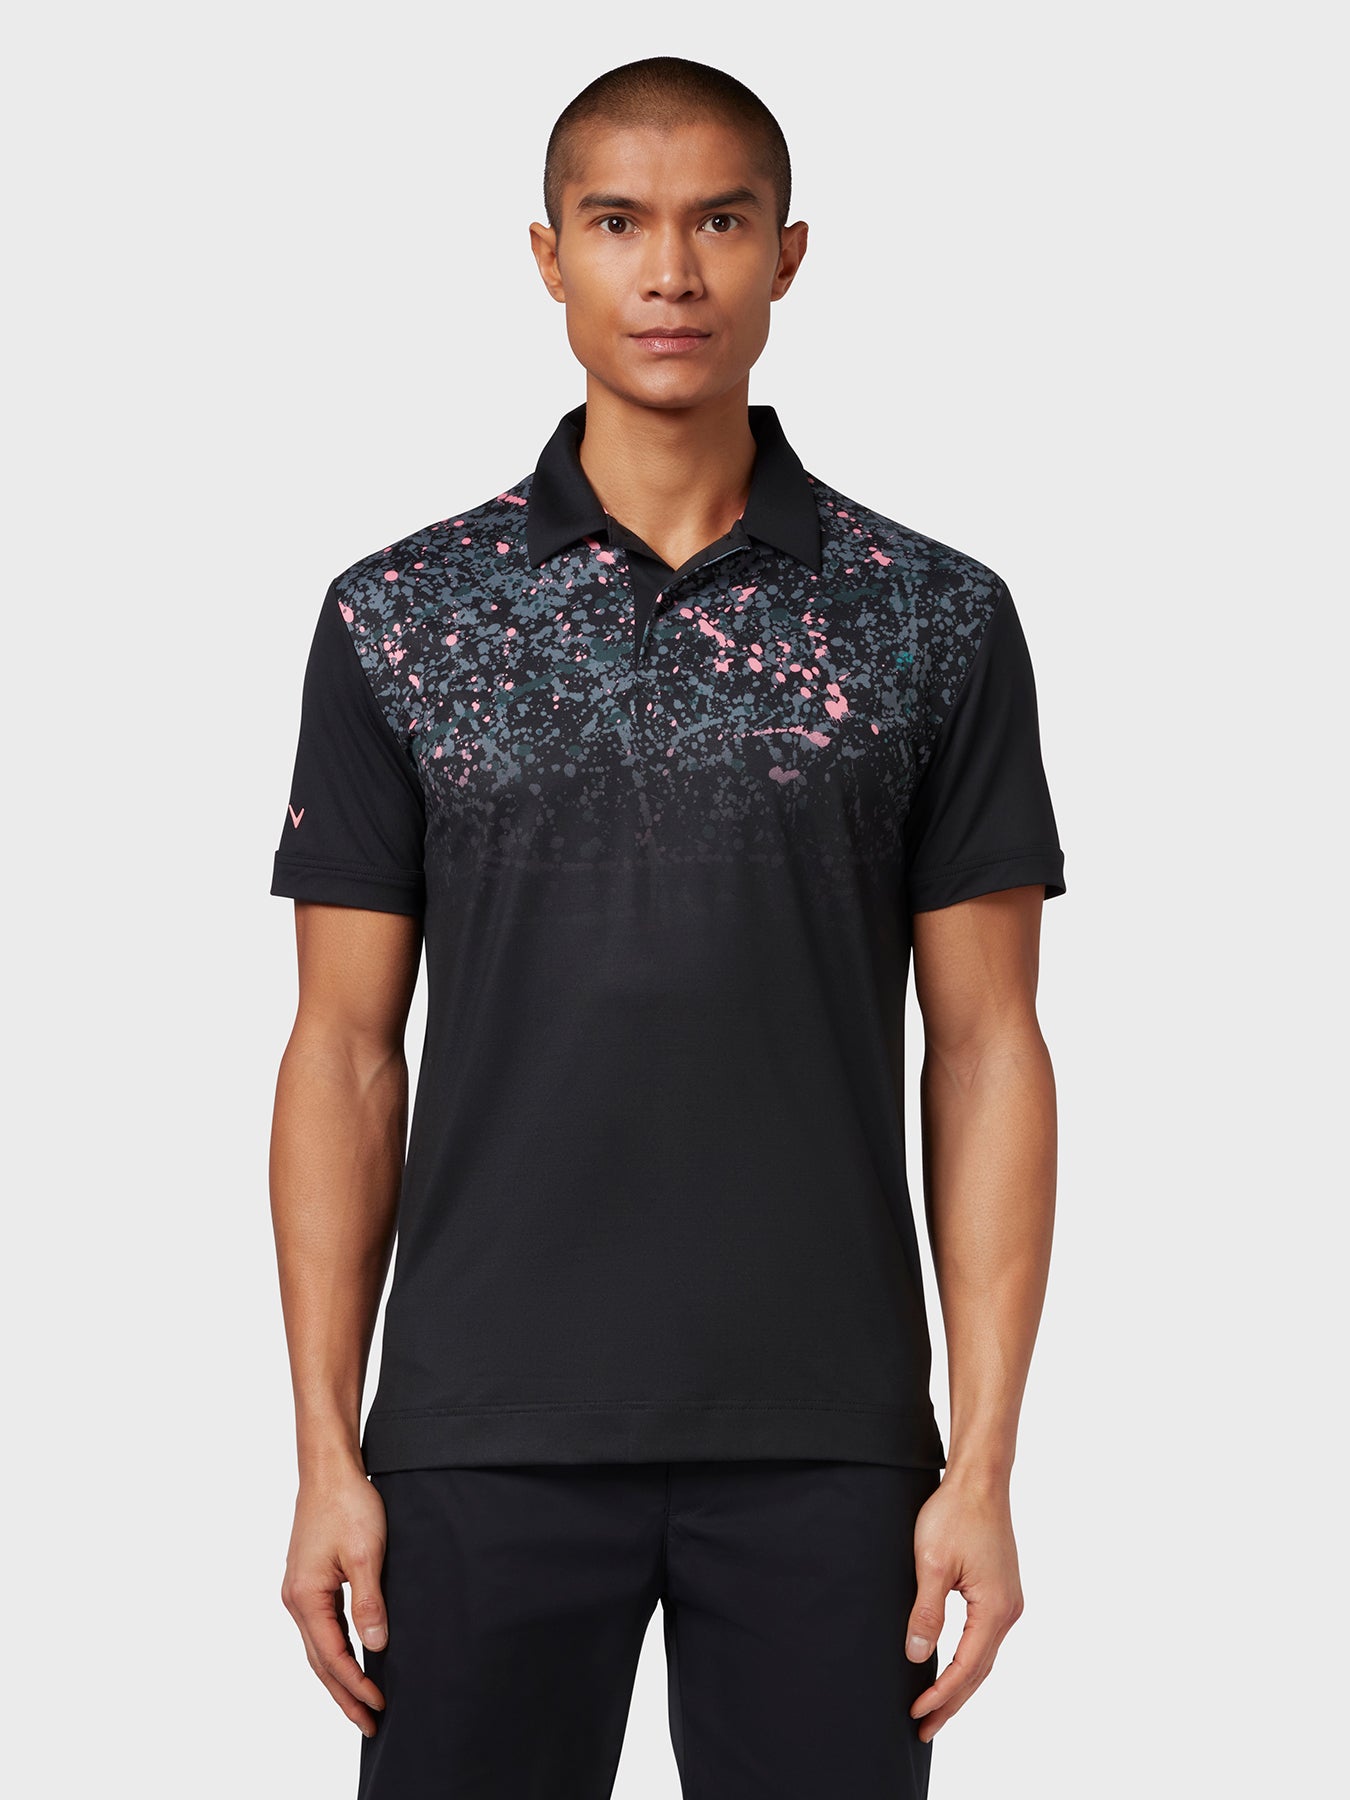 View X Series Splatter Paint Ombre Polo In Caviar Caviar S information